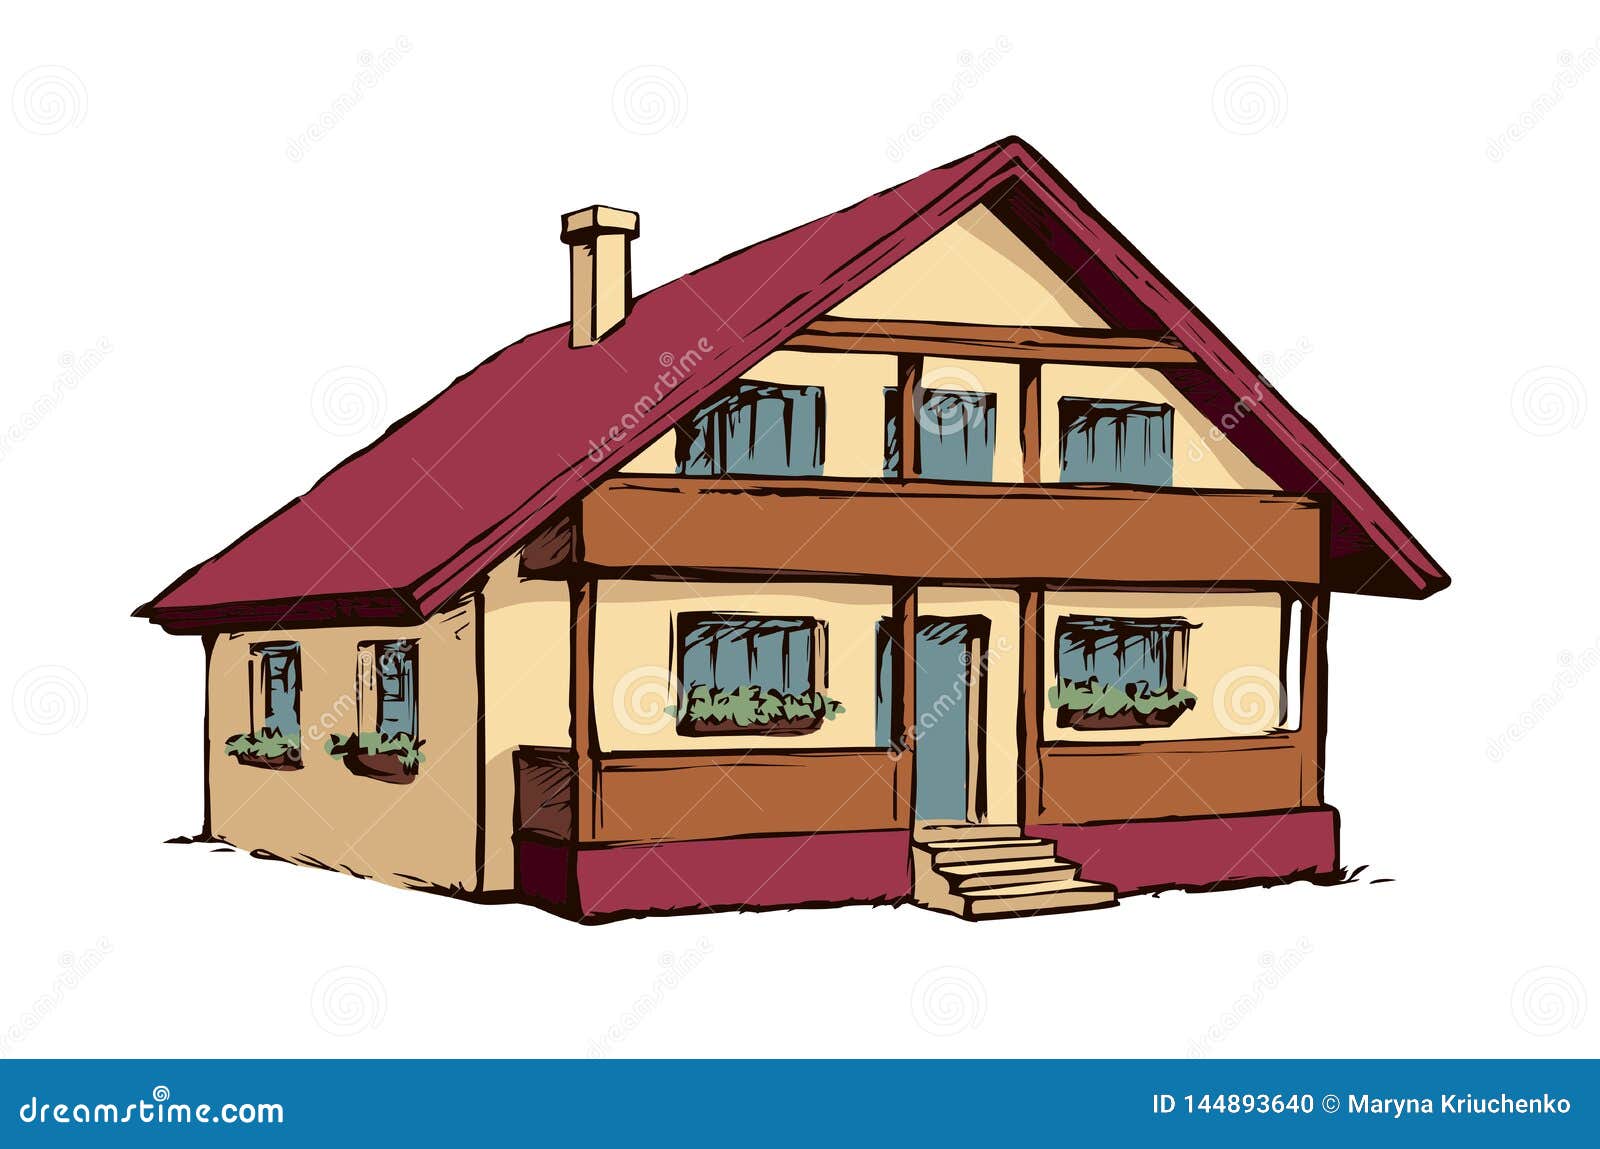 Vector drawing. House stock vector. Illustration of bright - 144893640